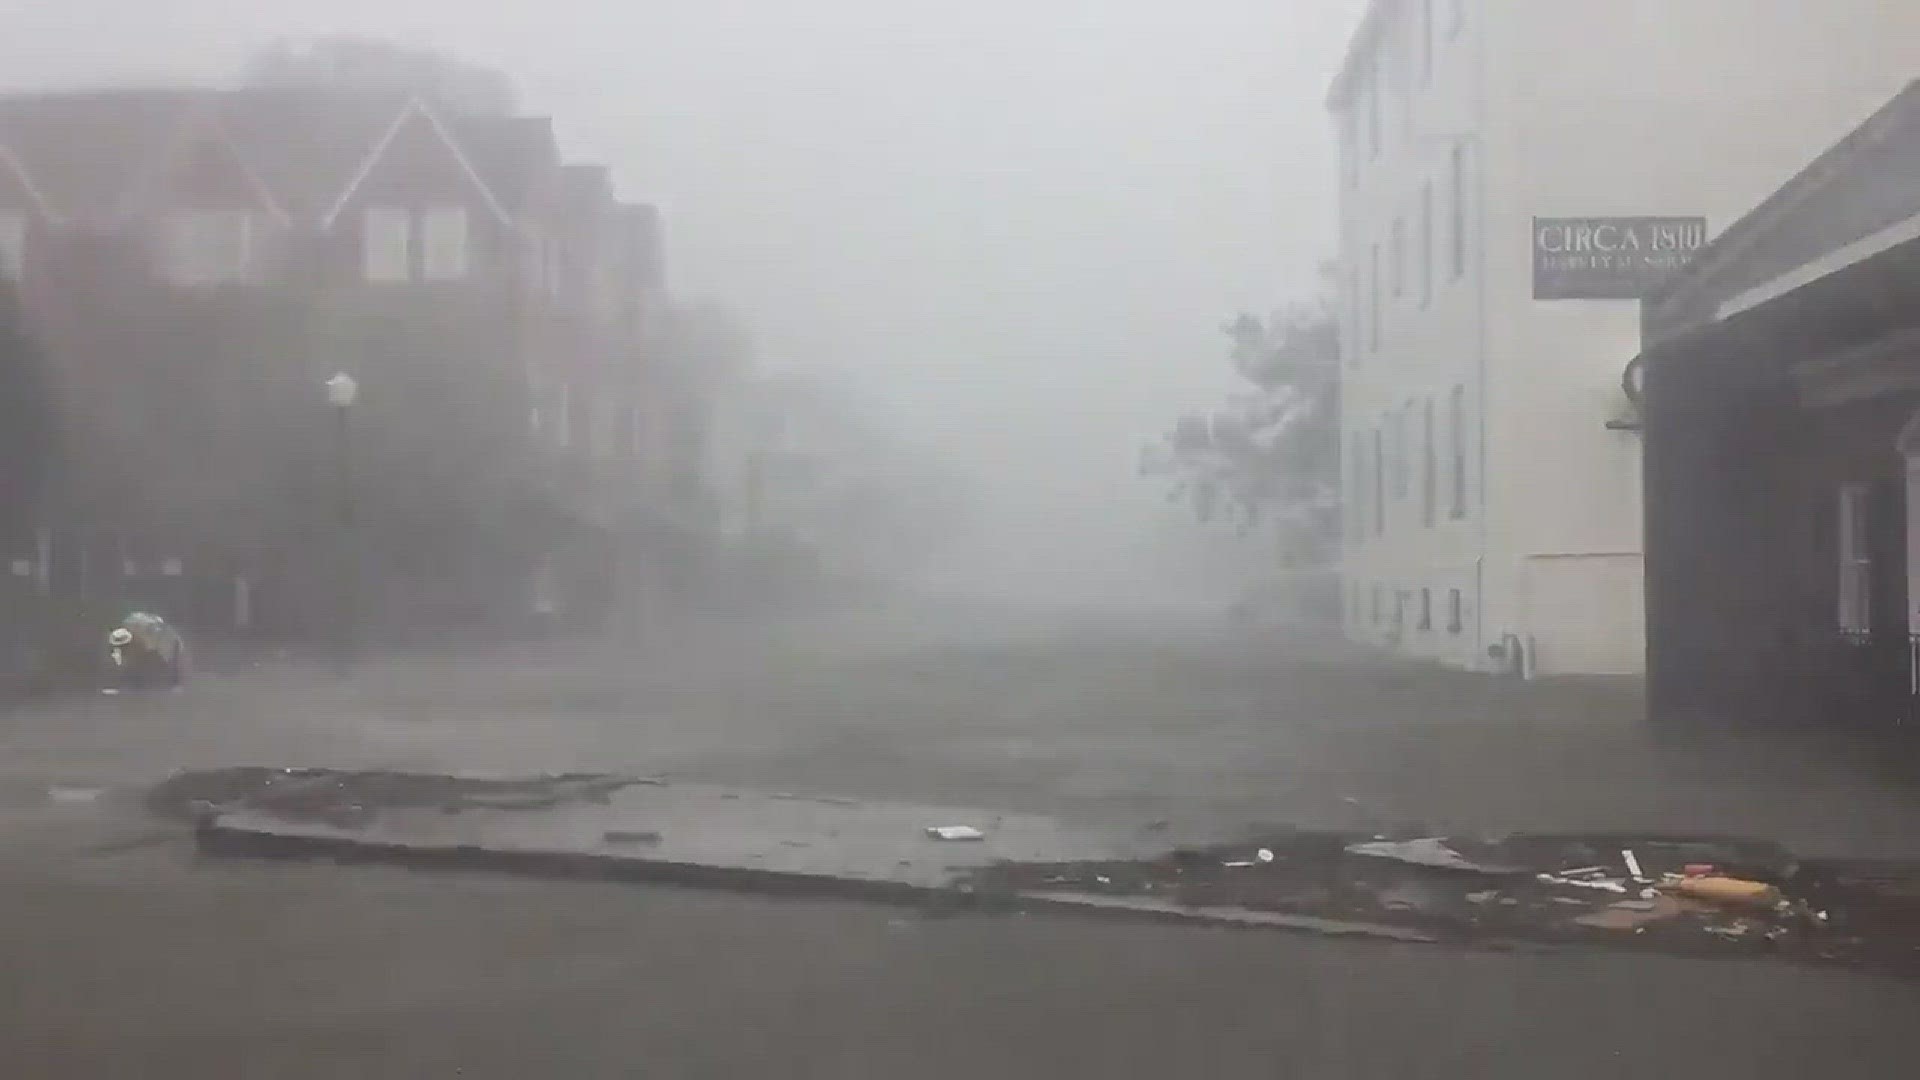 Storm chaser Cory Reppenhagan finds pounding rains and water pouring down Front Street in New Bern, N.C. on September 13, 2018 as Hurricane Florence hit the East Coast.